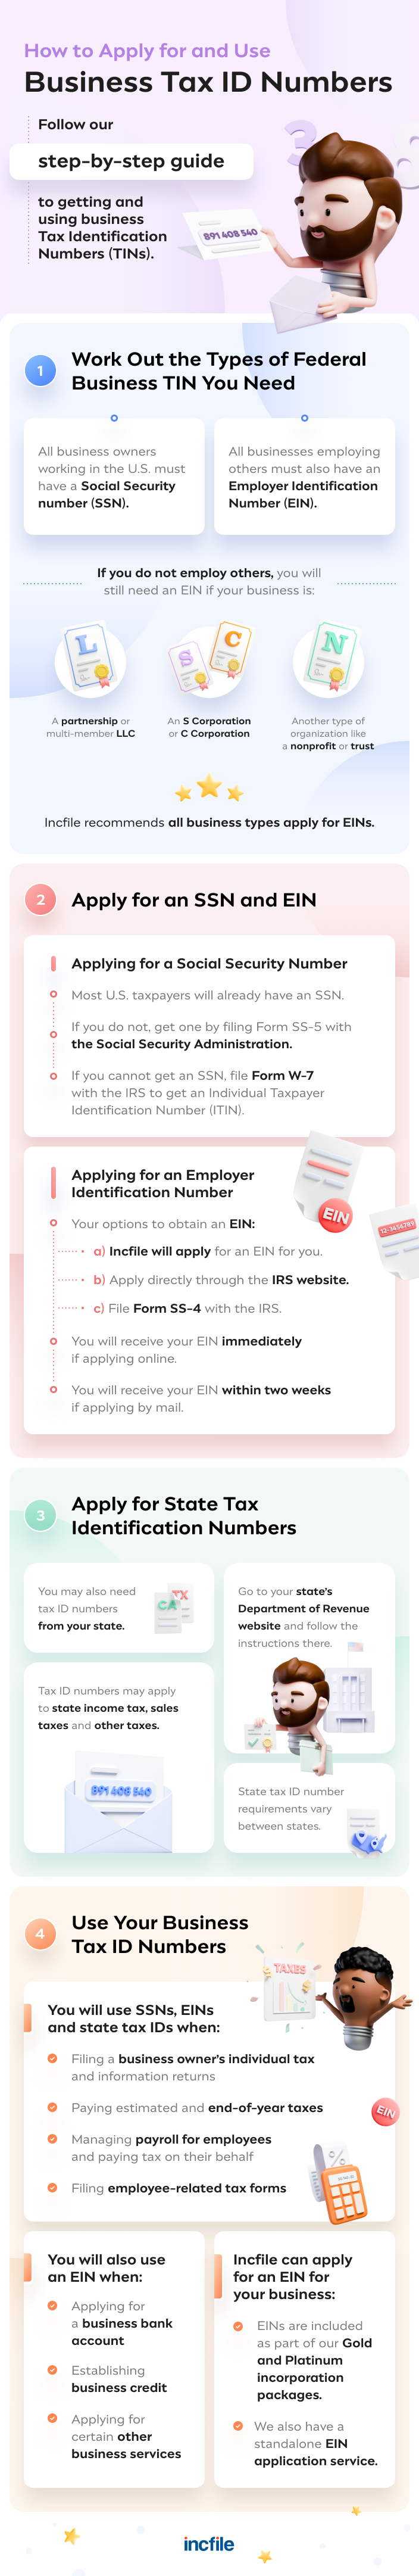 apply for and use business tax id number